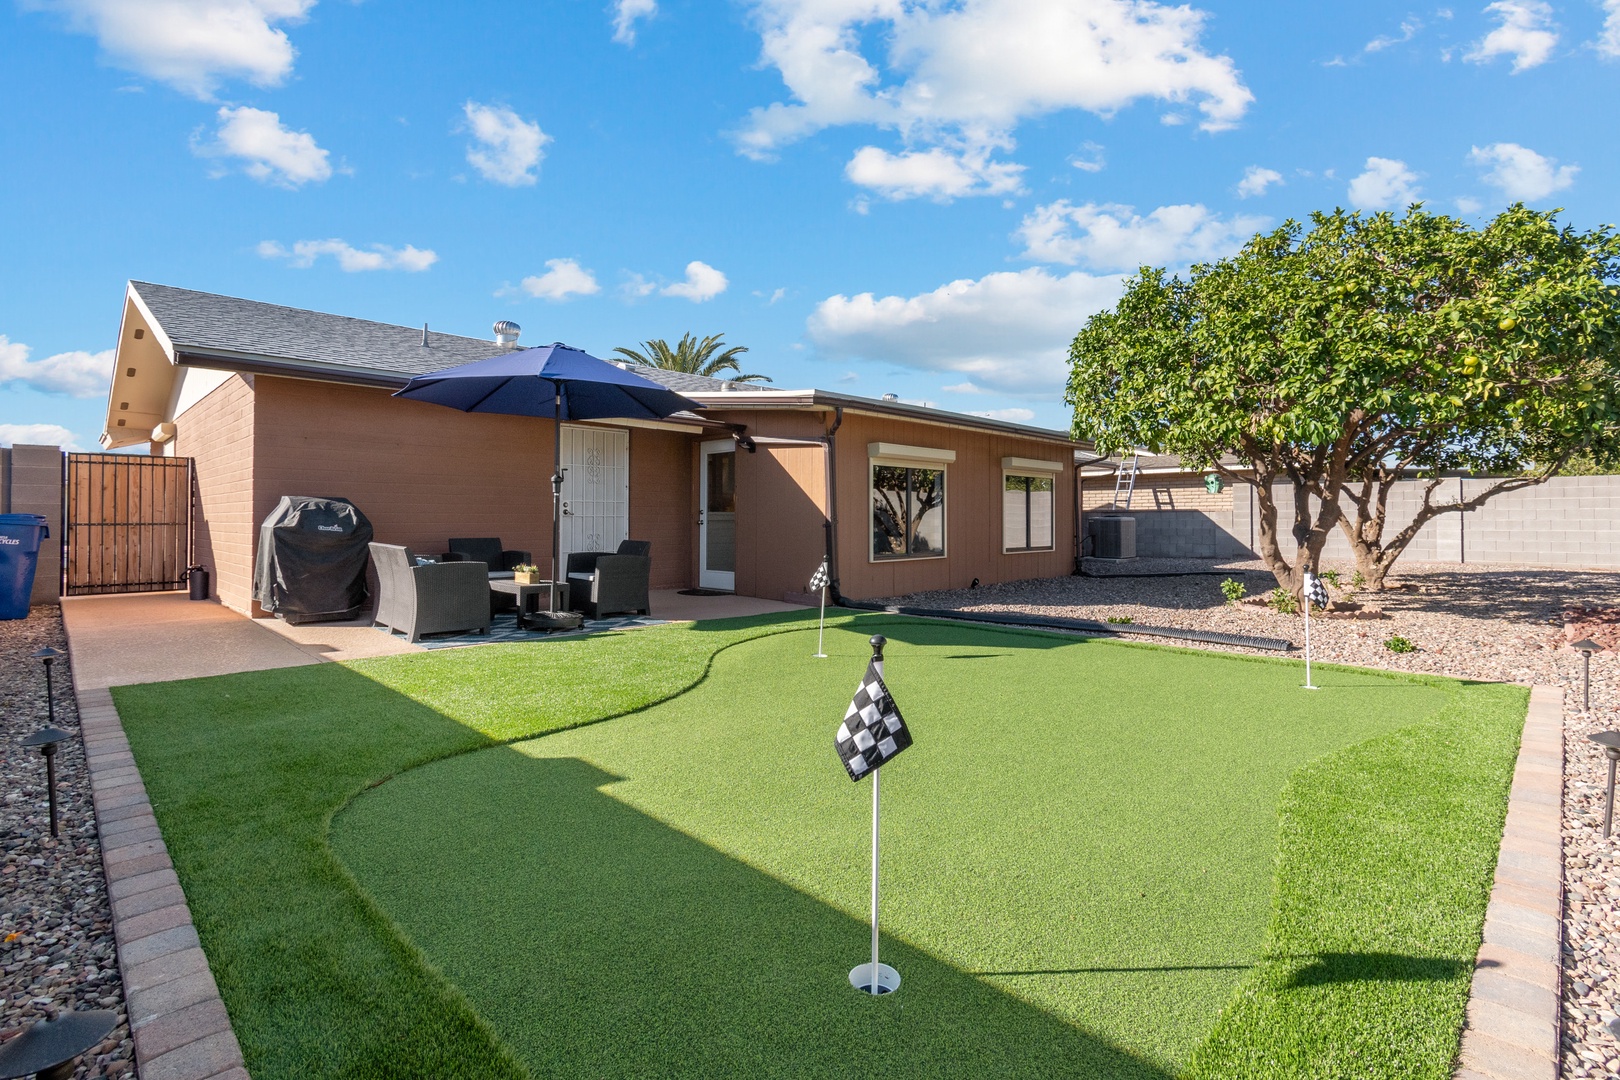 Mesa Vacation Rentals, Private Putting Oasis - This is a 55+ community with a great little public golf course.